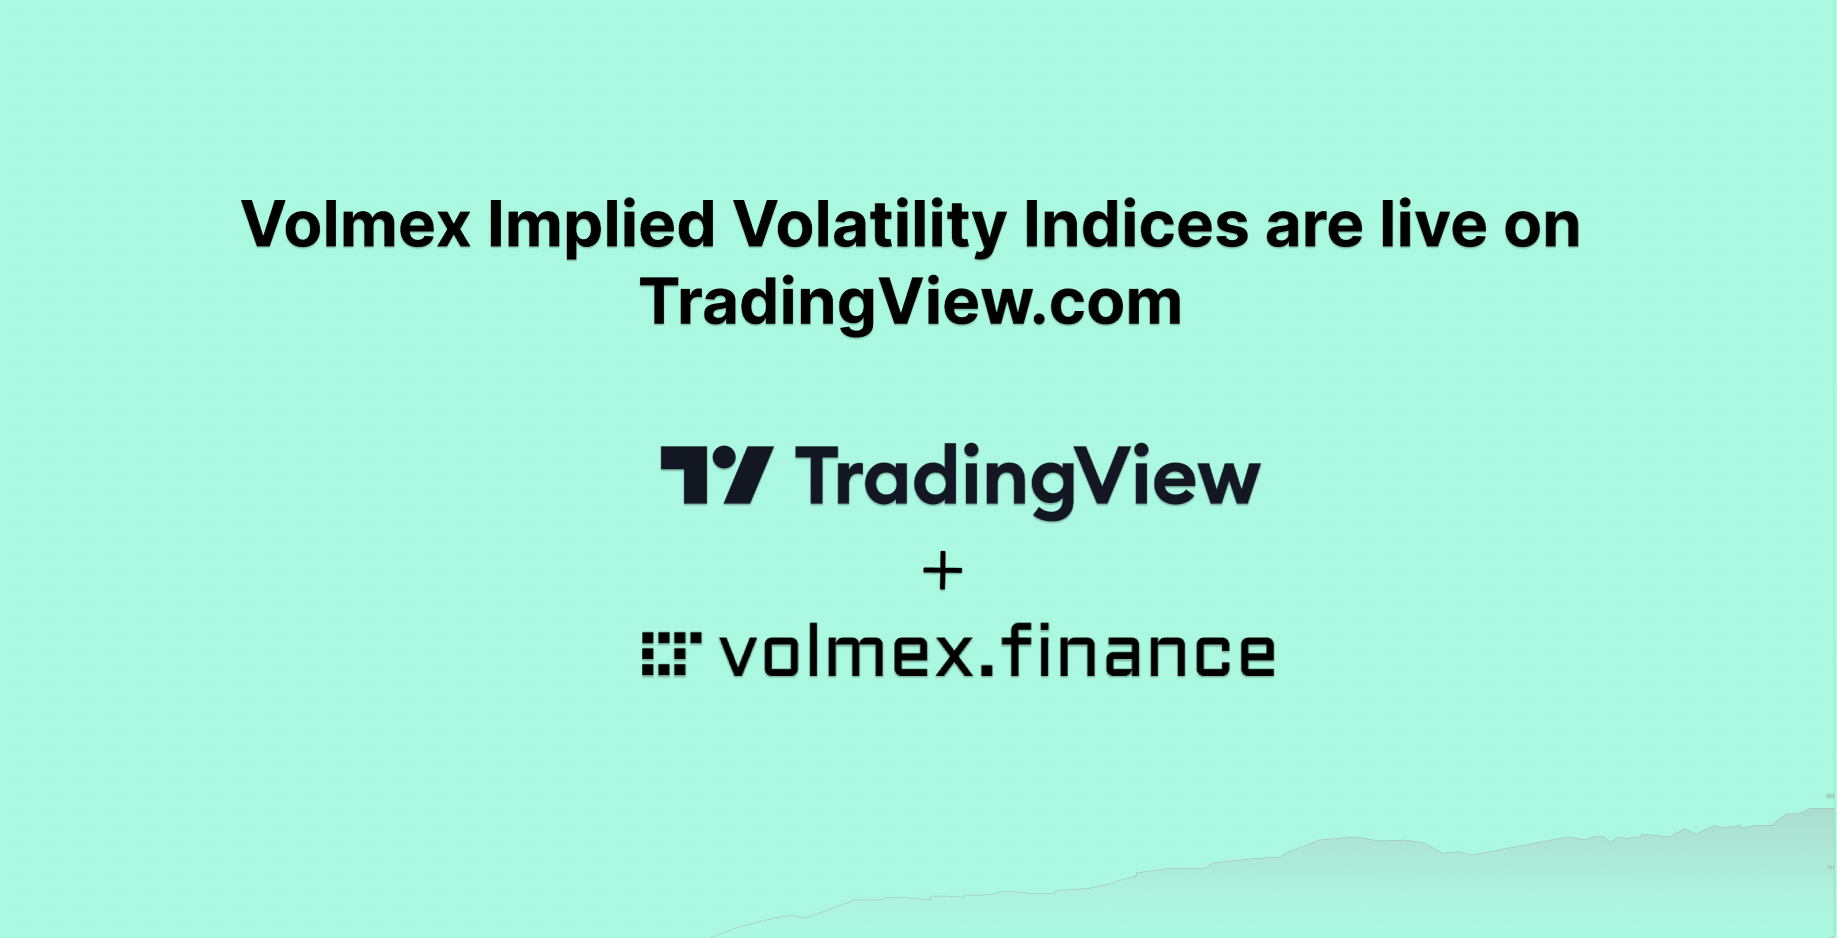 Volmex Implied Volatility Indices are Live on TradingView.com